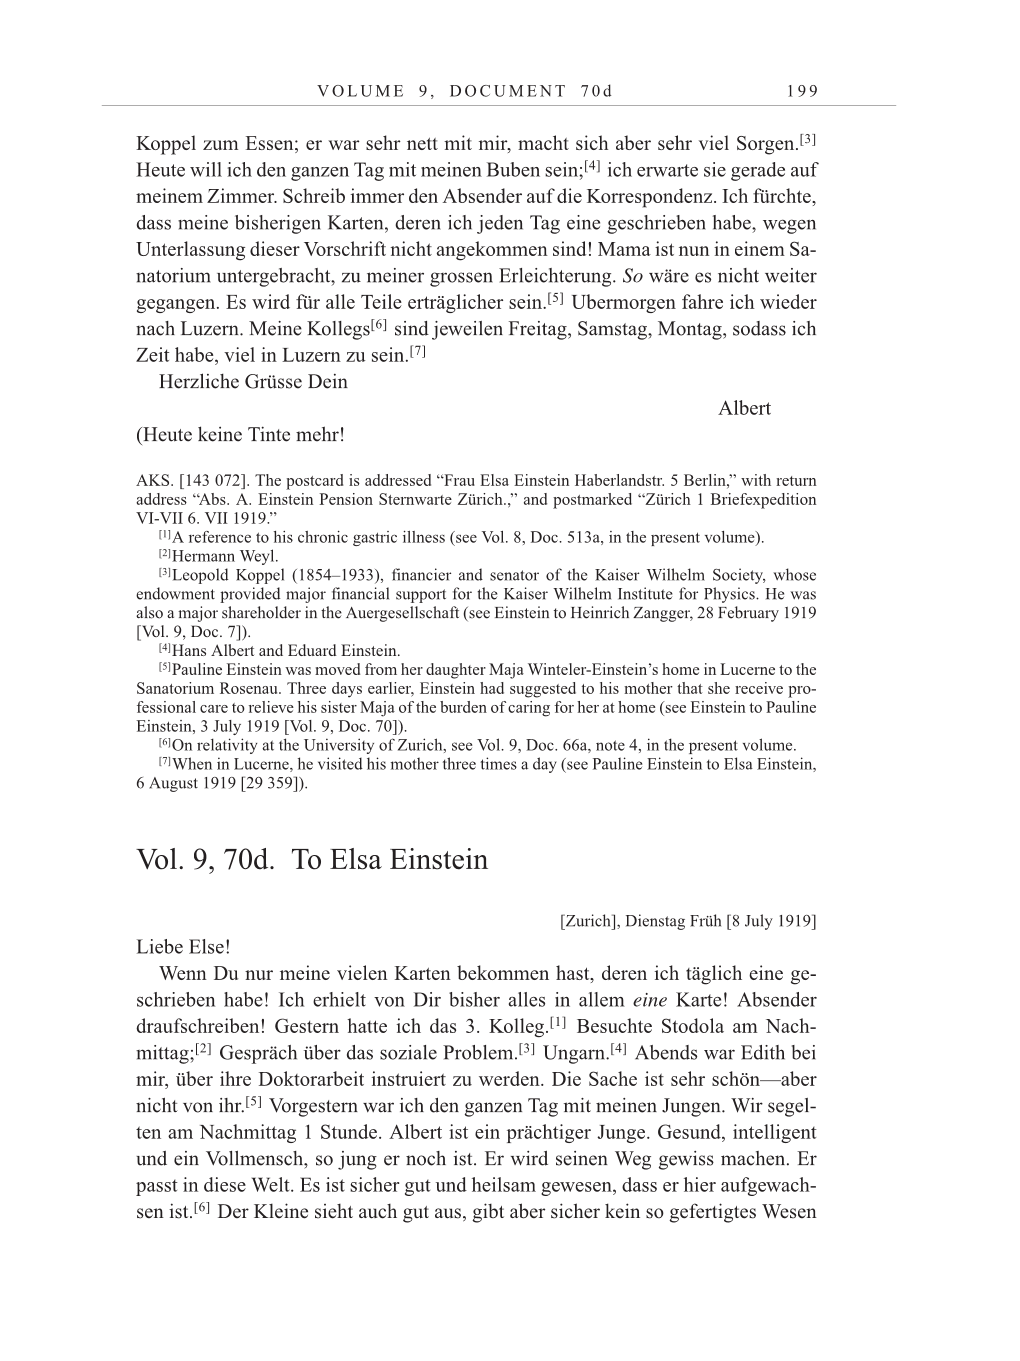 Volume 10: The Berlin Years: Correspondence May-December 1920 / Supplementary Correspondence 1909-1920 page 199